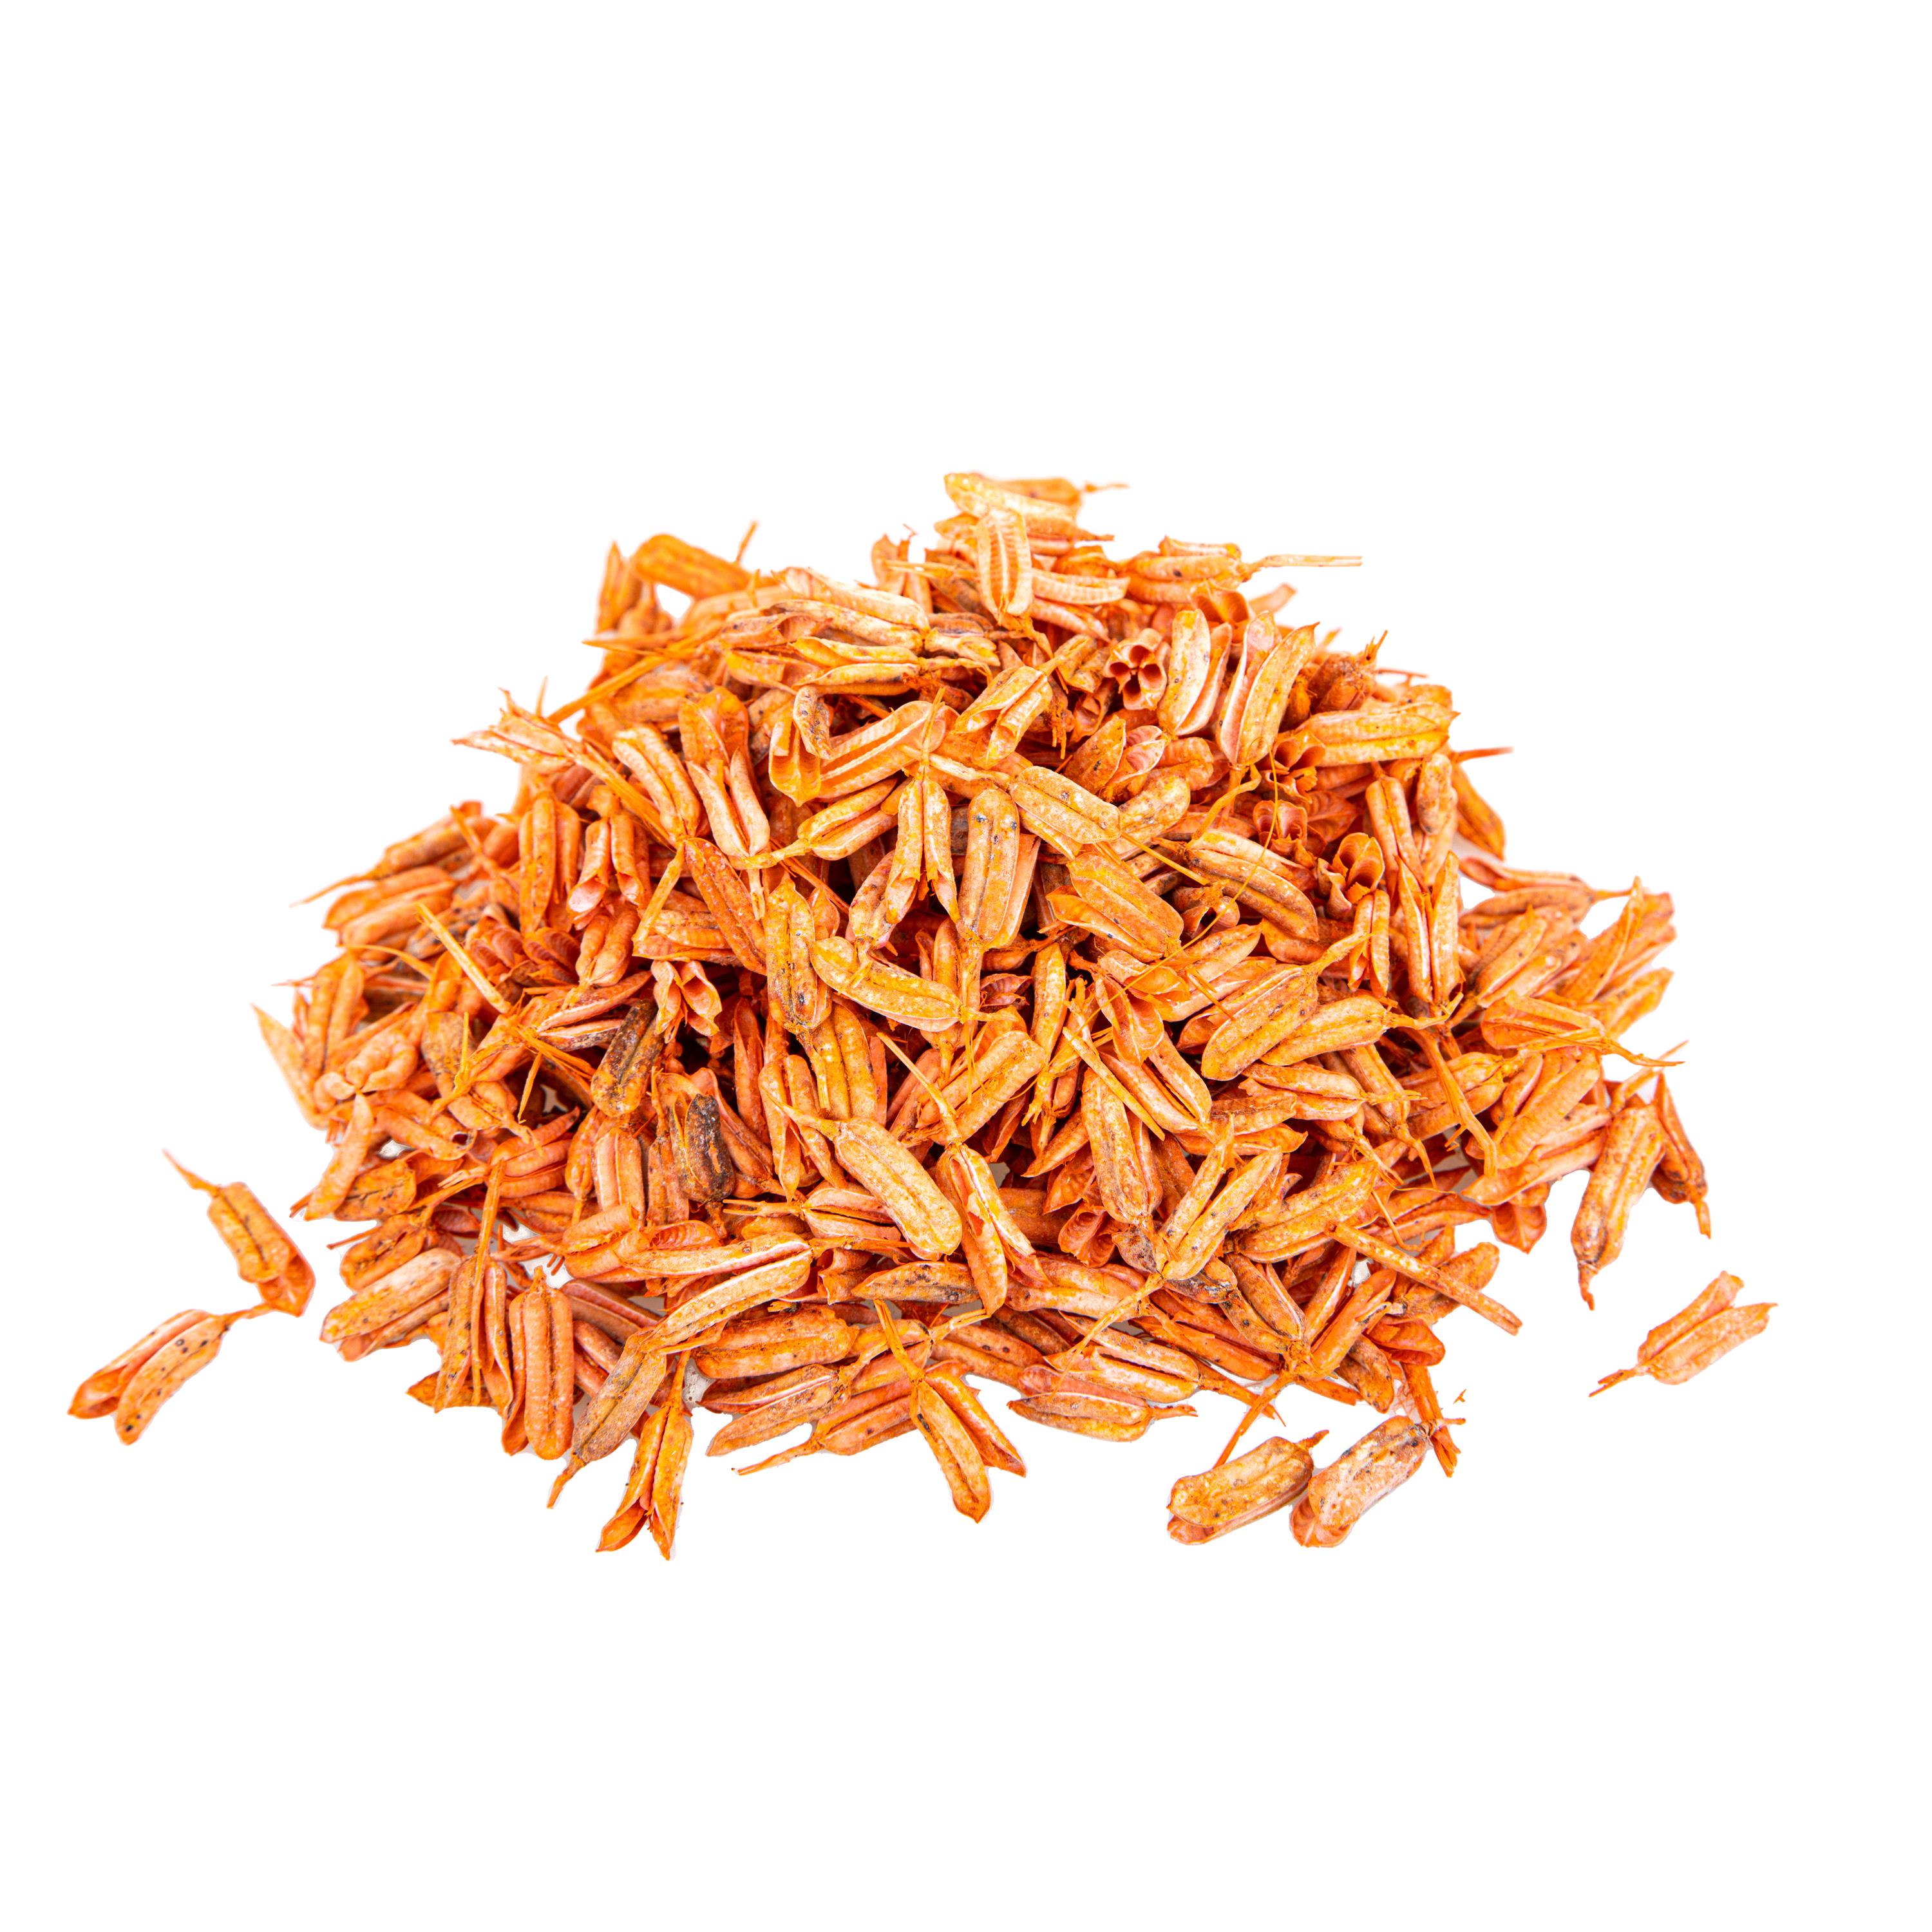 NATURAL PRODUCTS DRIED FLOWERS AND ERBS, Cinnamon, raffia, wood slices,sisal pout-porry etc, CICILEA FOGLIE COLORATE 1 KG